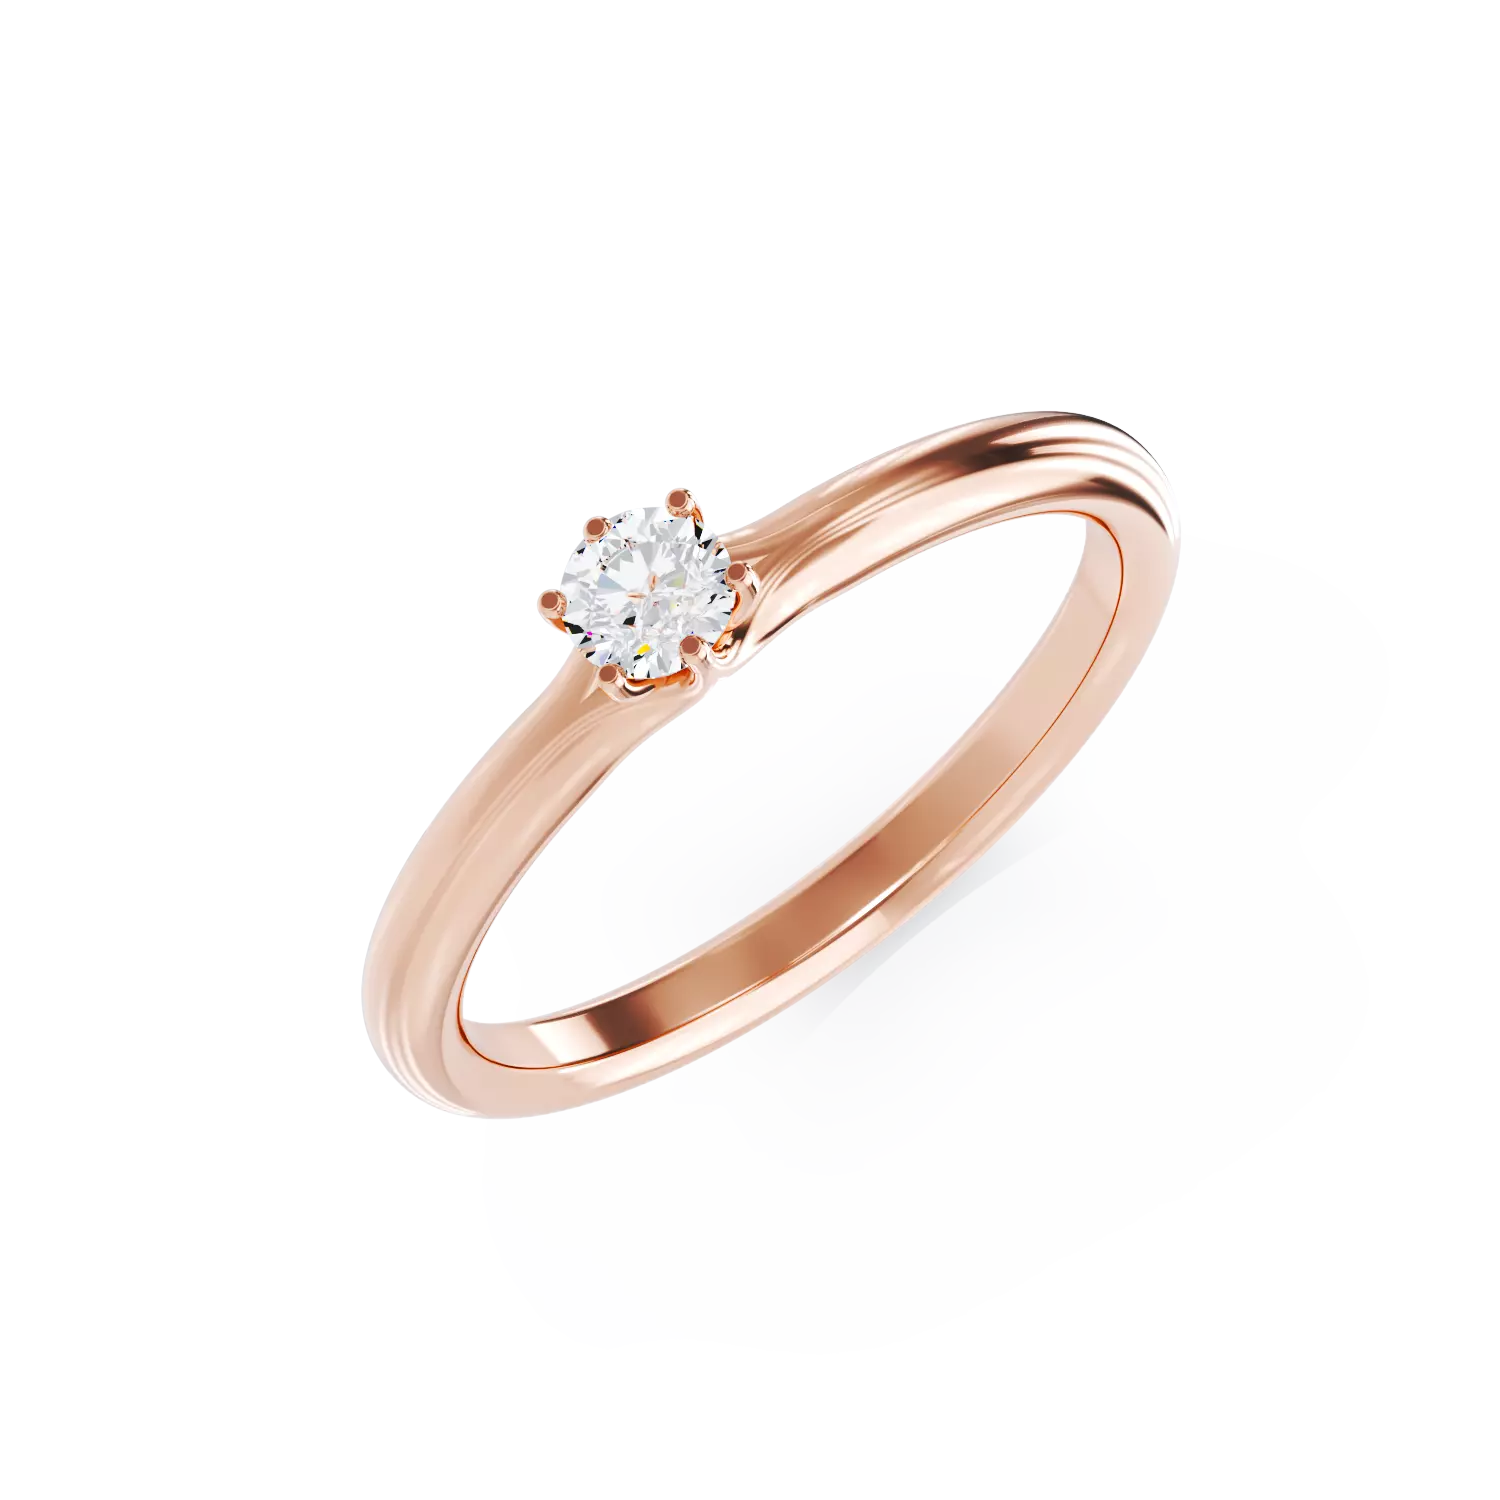 18K rose gold engagement ring with 0.145ct solitaire diamond